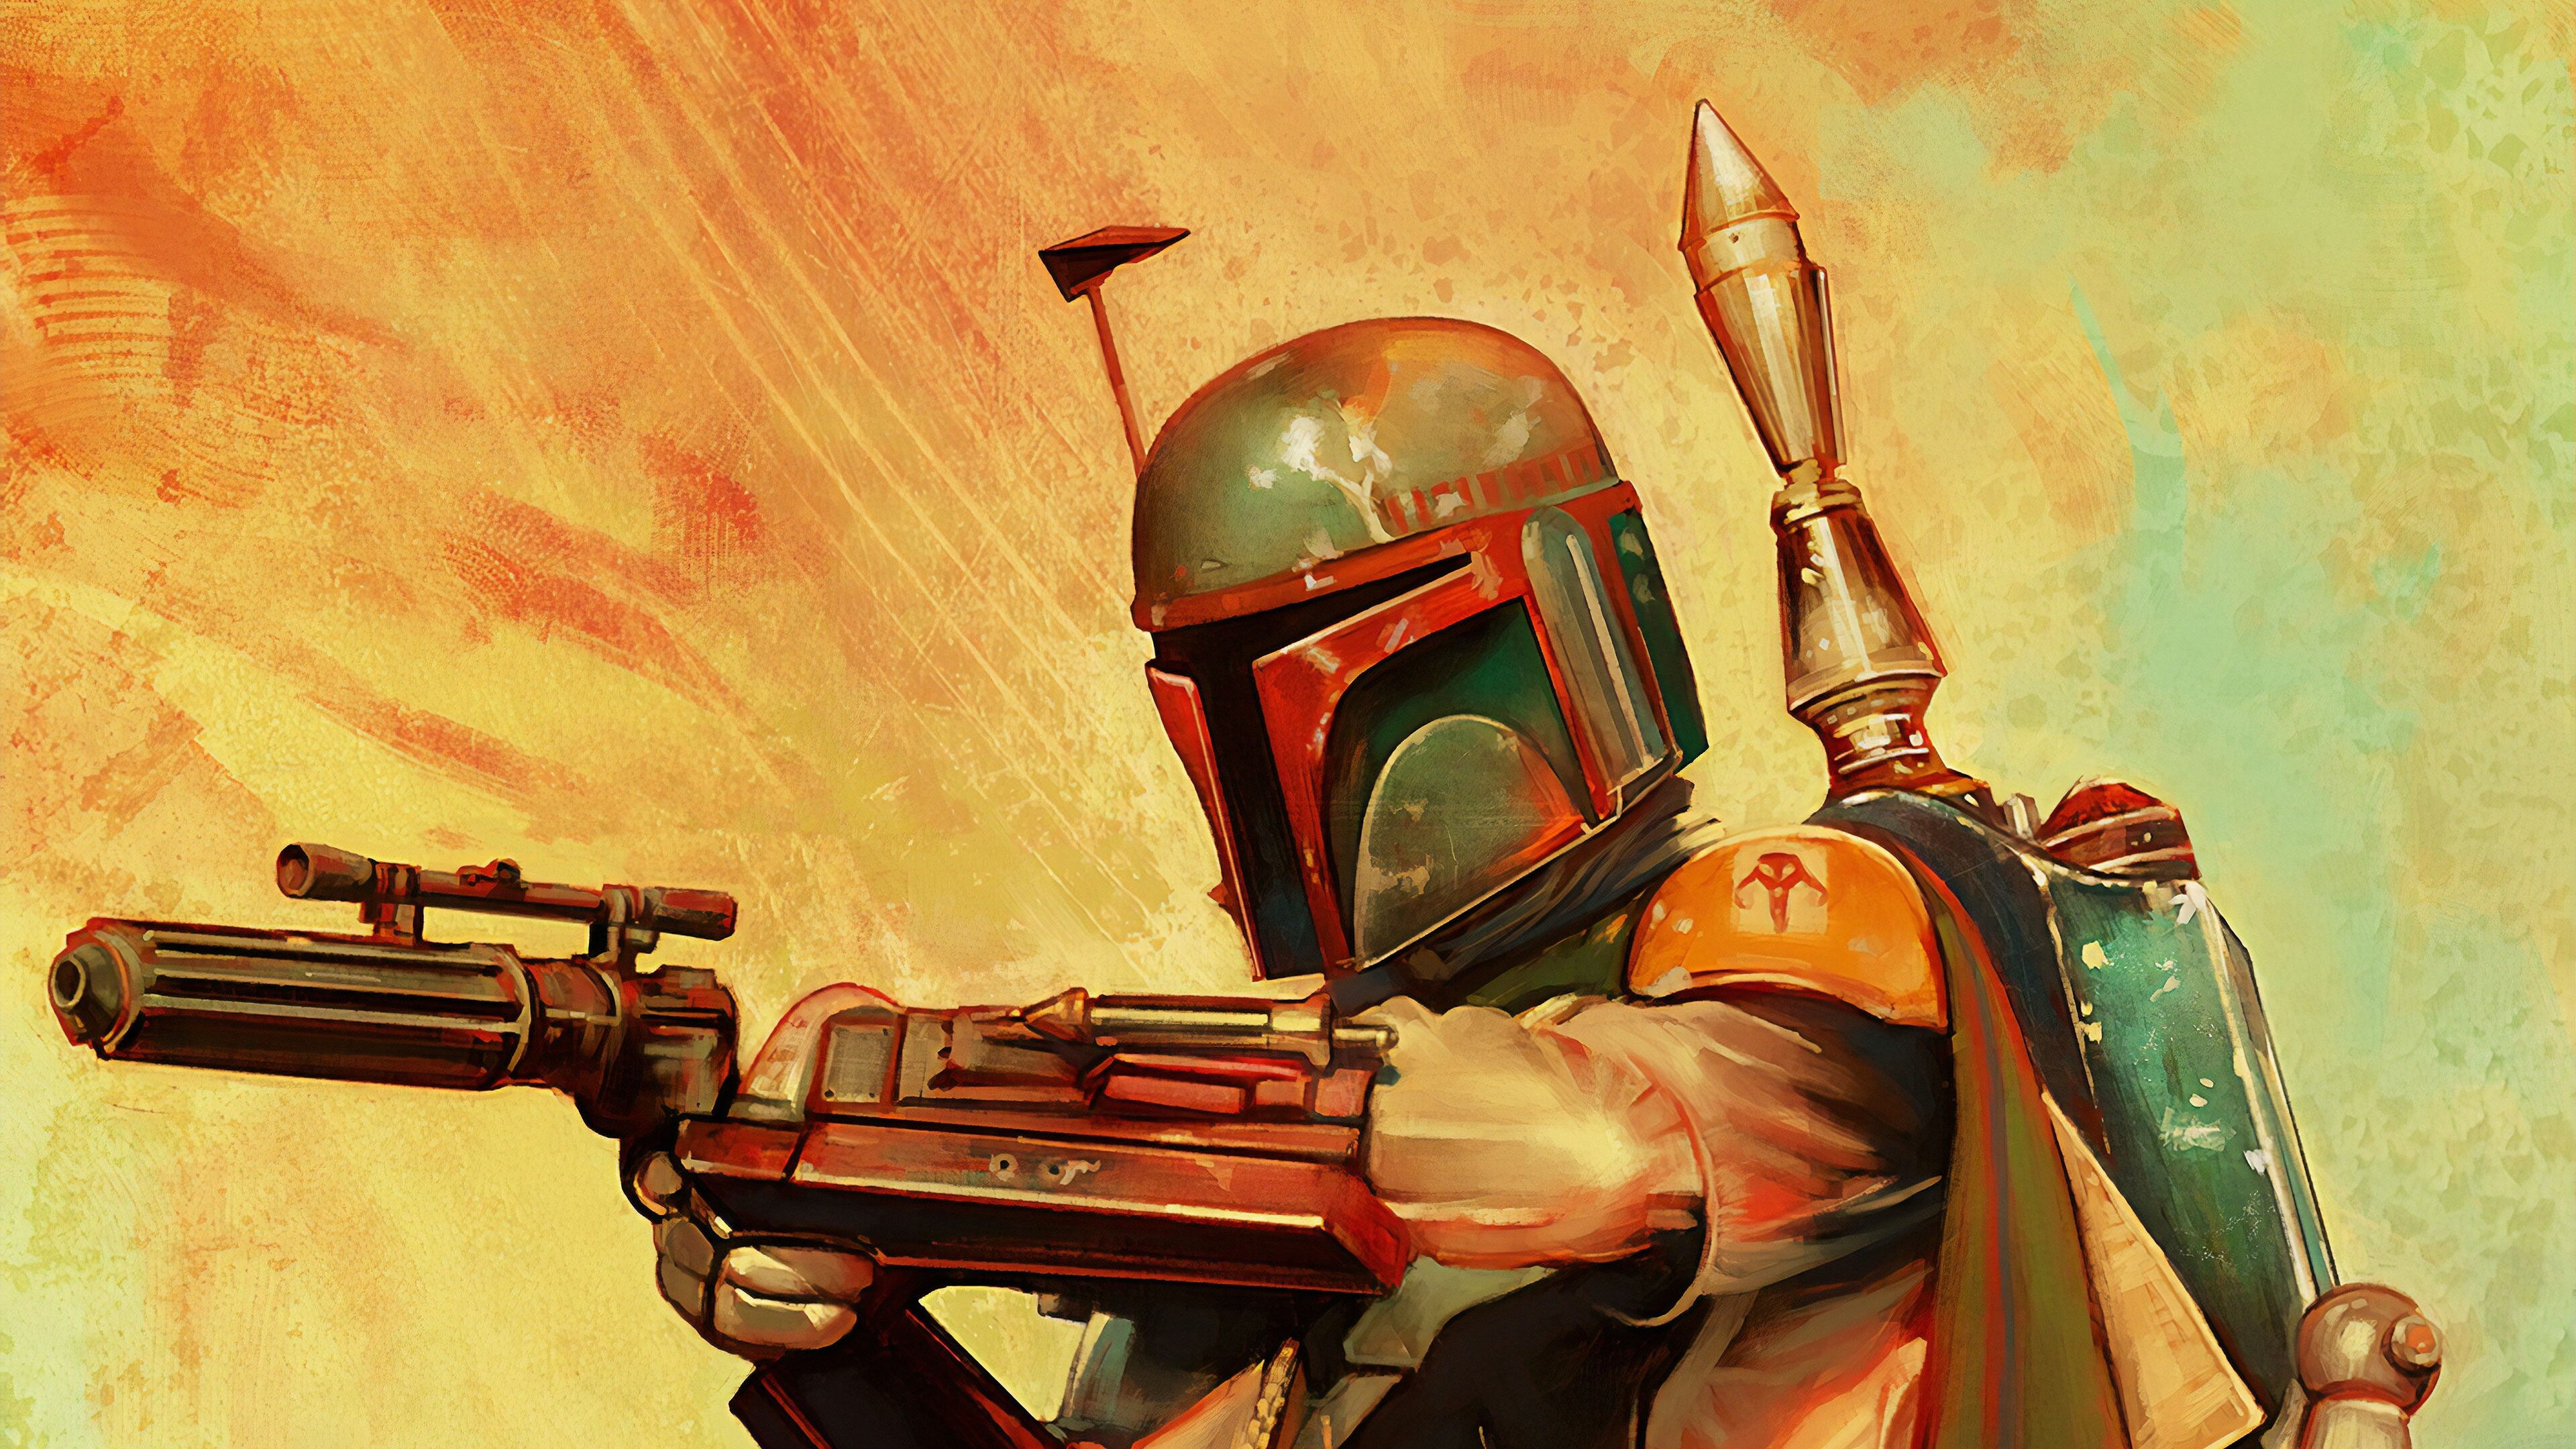 The Mandalorian: The Mandalorian's costume was created by Legacy Effects. 3840x2160 4K Wallpaper.